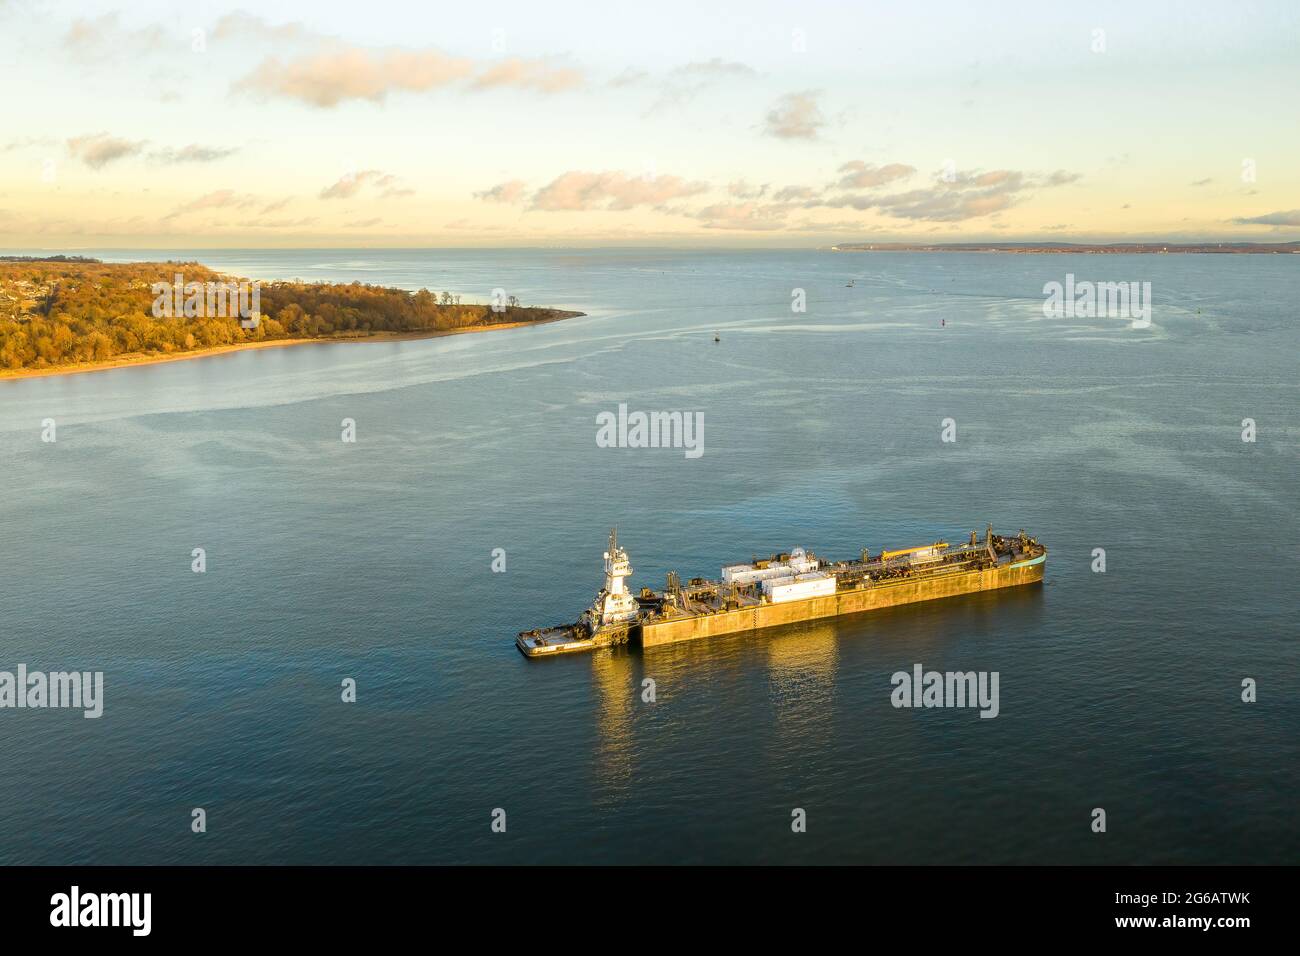 Aerial of large barge in water at sunset with a pink sky and a piece of land in view. Stock Photo